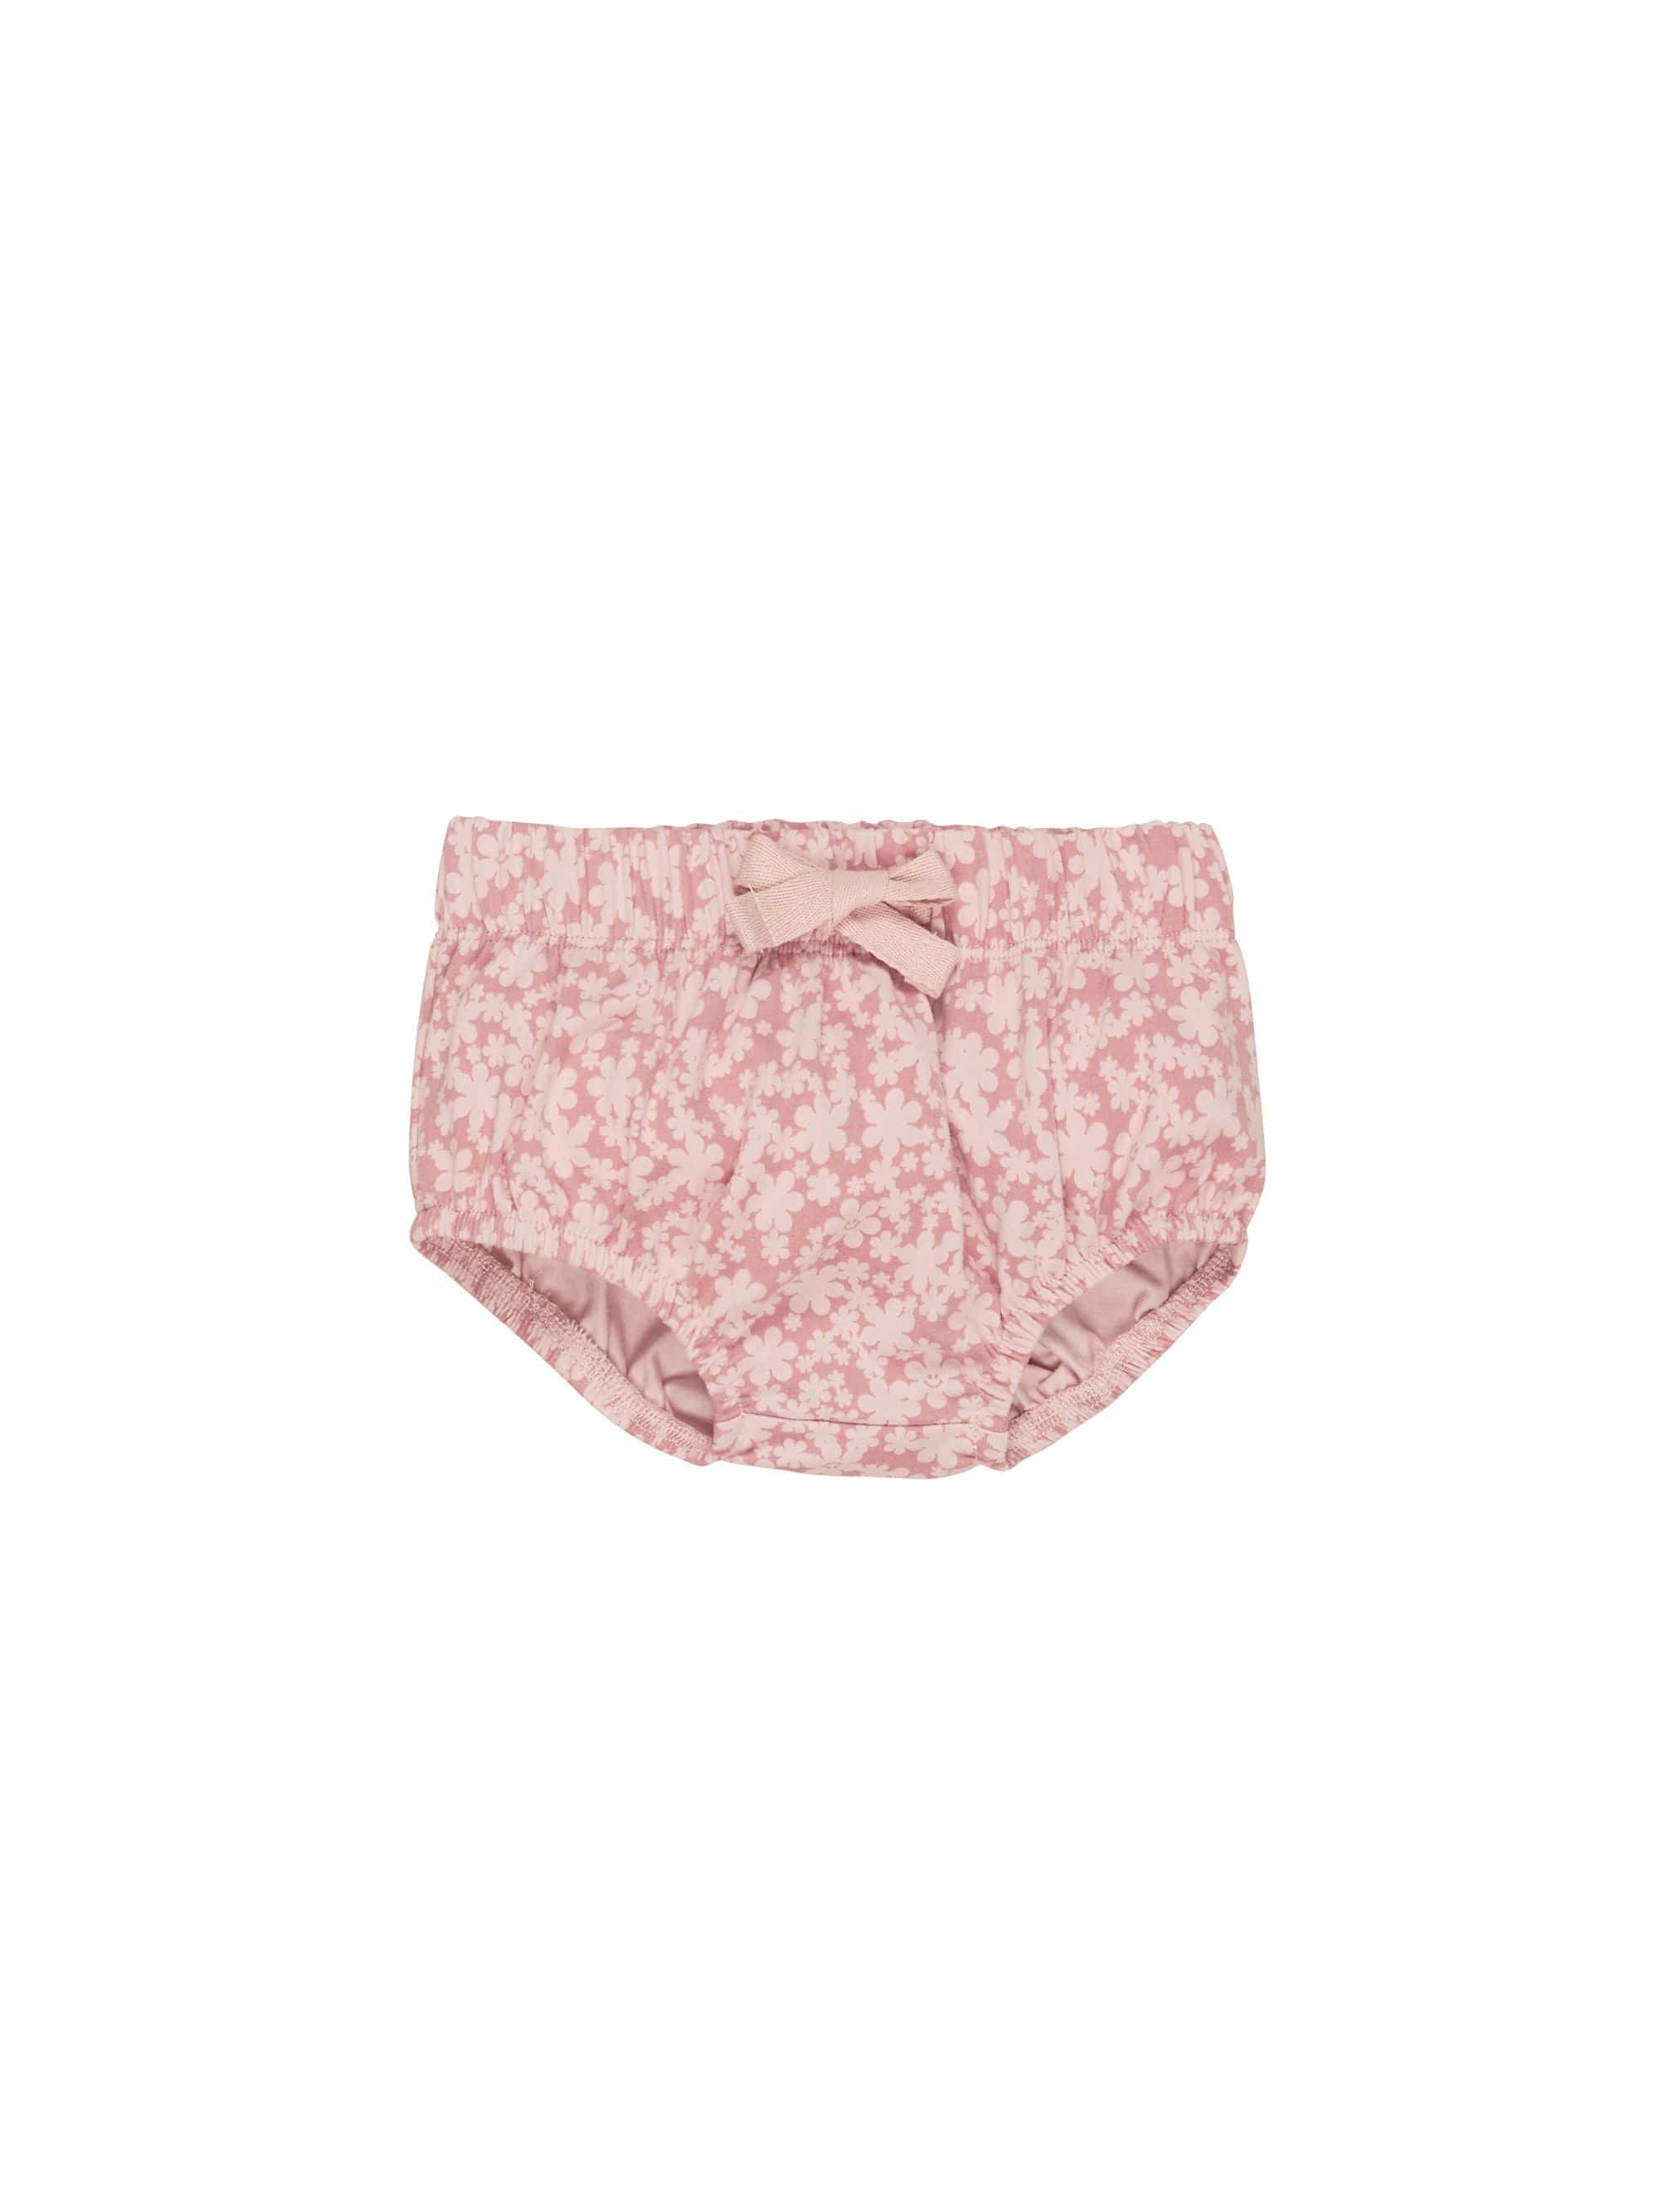 Huxbaby Girls Bottoms Smile Floral Bloomer